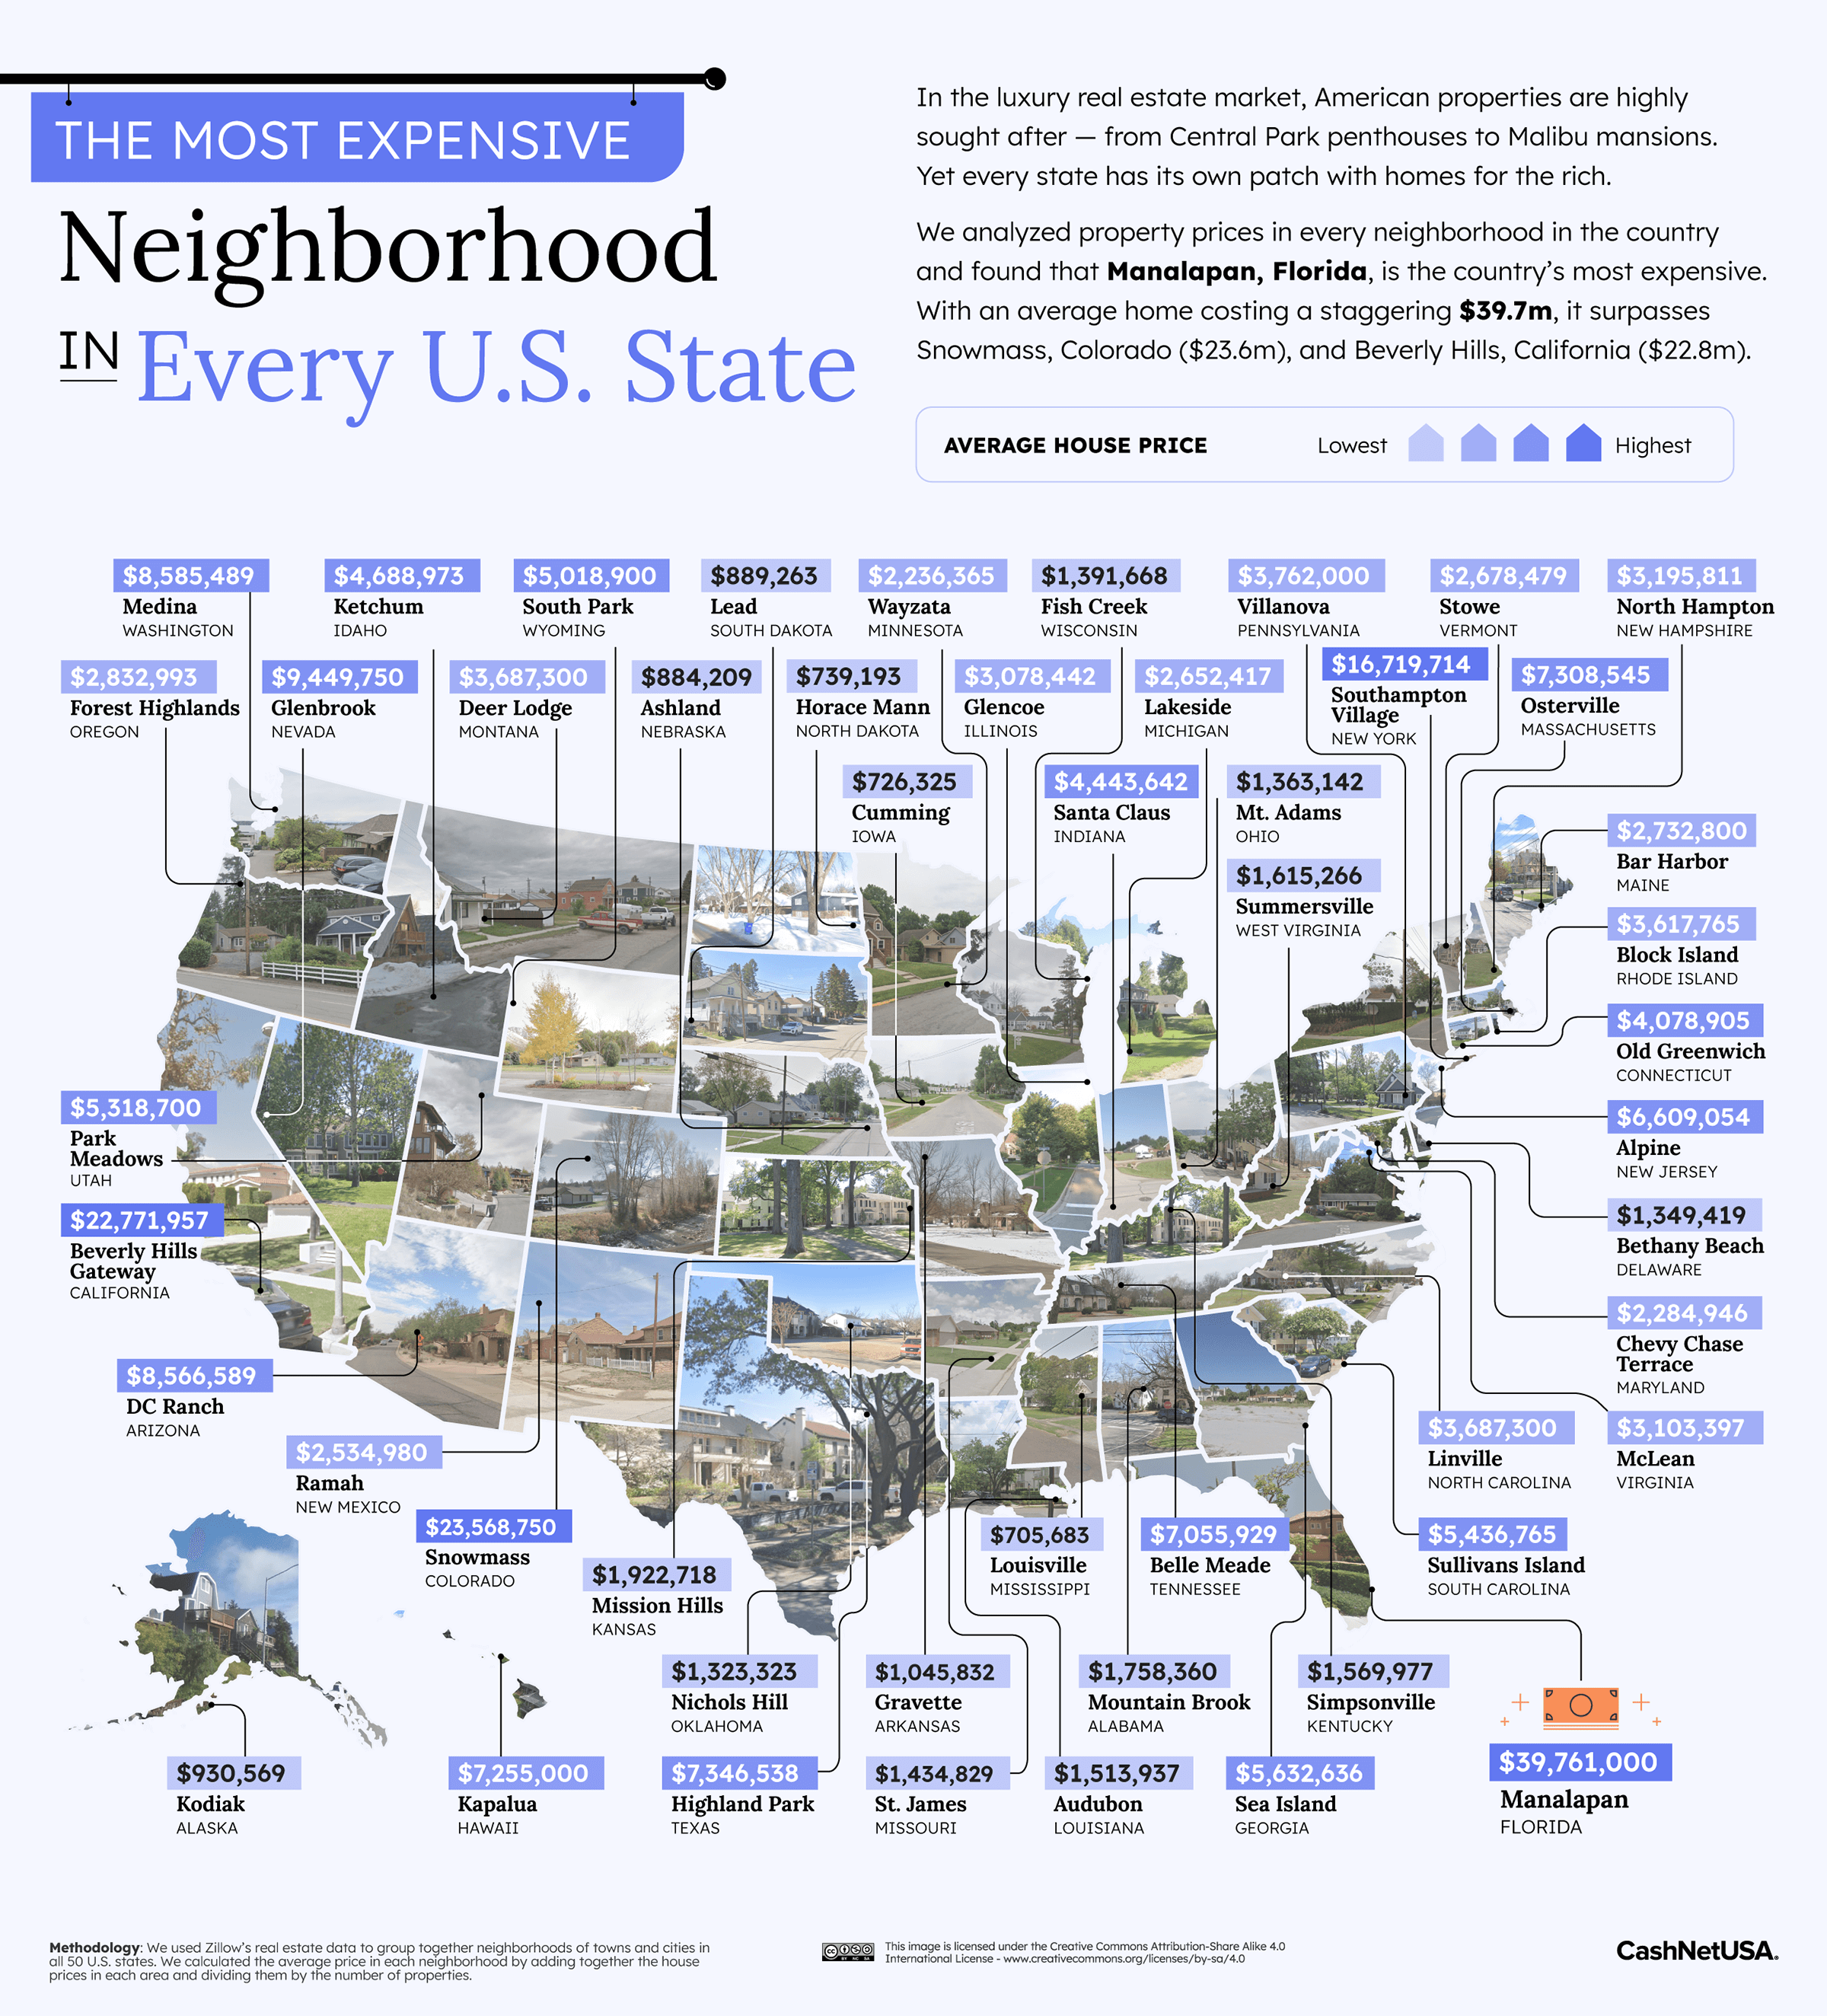 Most expensive neighborhood in every U.S. state map